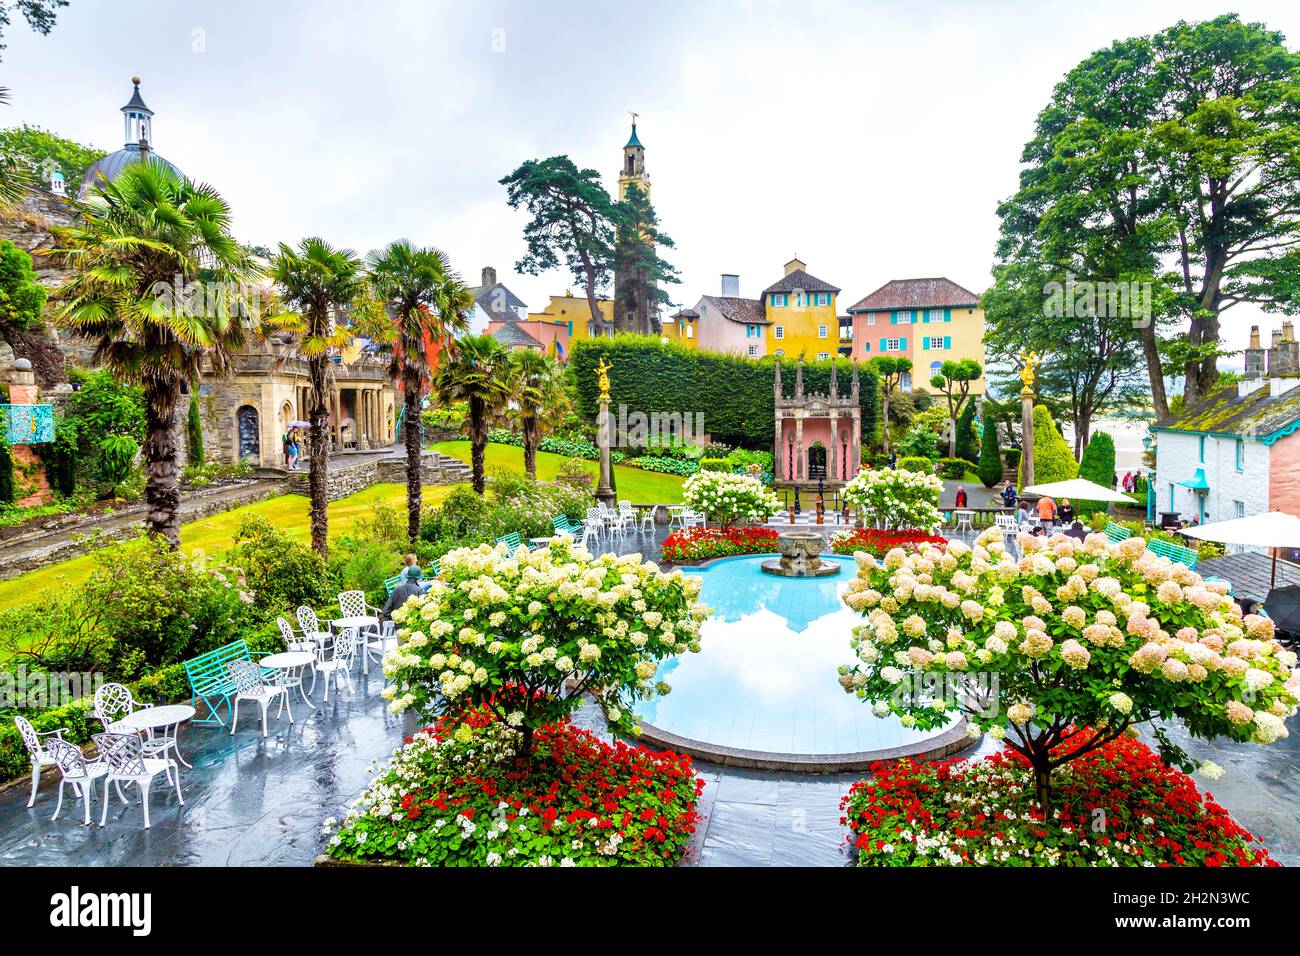 Colourful buildings and fountain at Mediterranean style town Portmeirion, Snowdonia National Park, Wales, UK Stock Photo